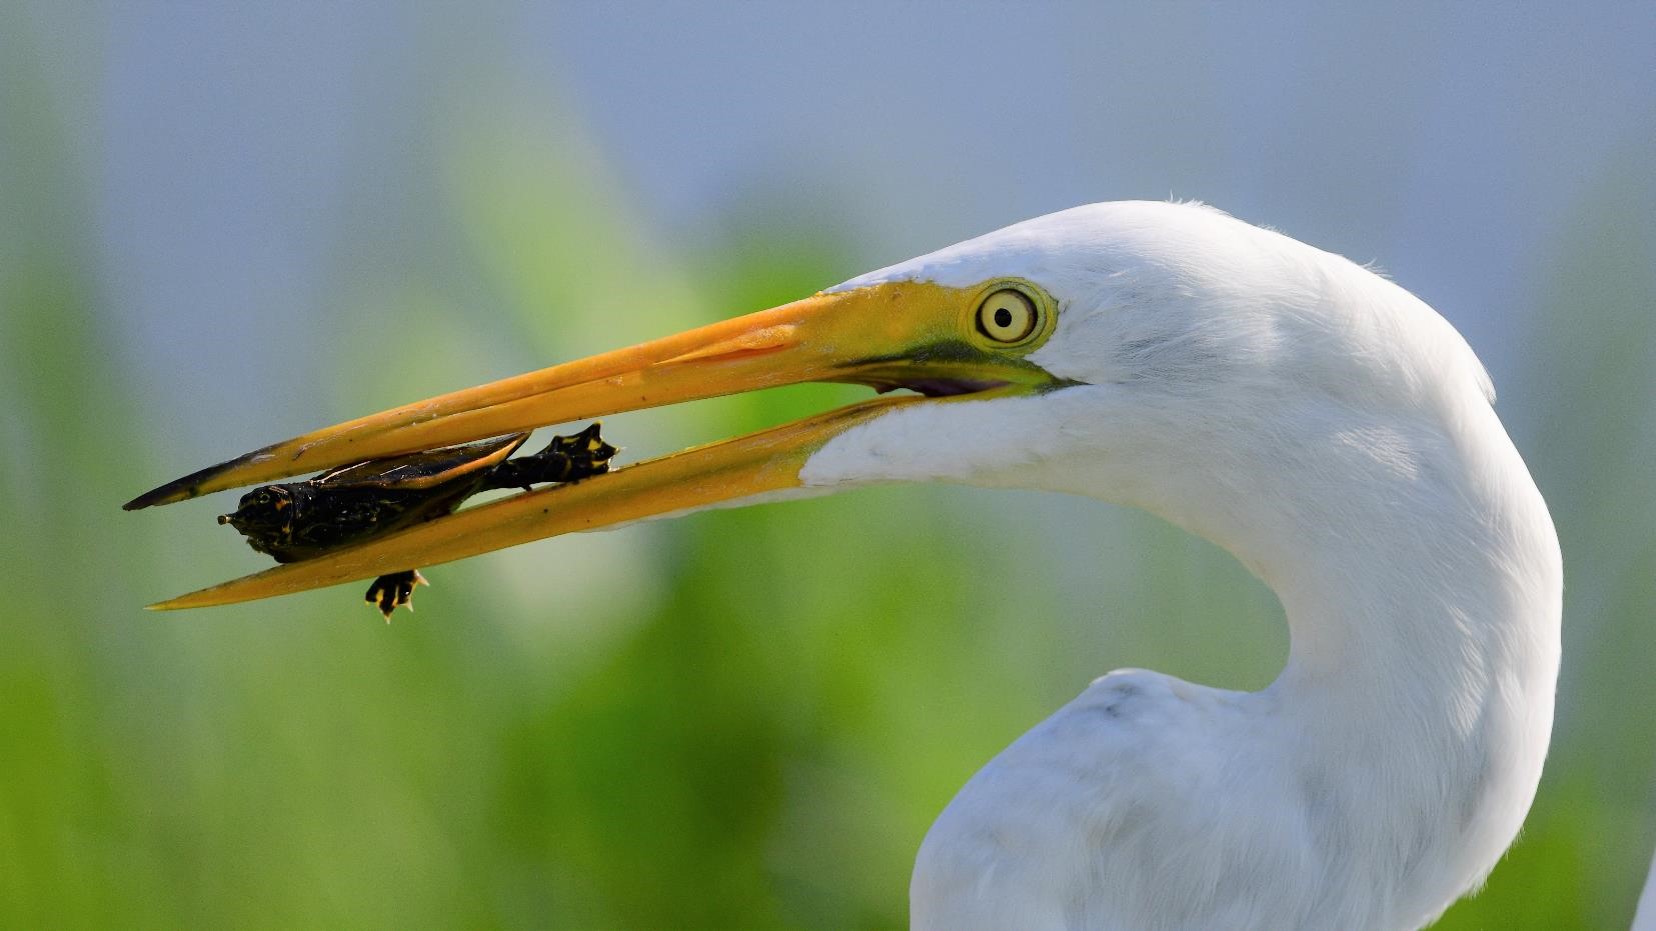 "Turtle Talk - Great Egret and Florida Softshell" Youth Fifth Place: Lauren Chin, Windermere 
